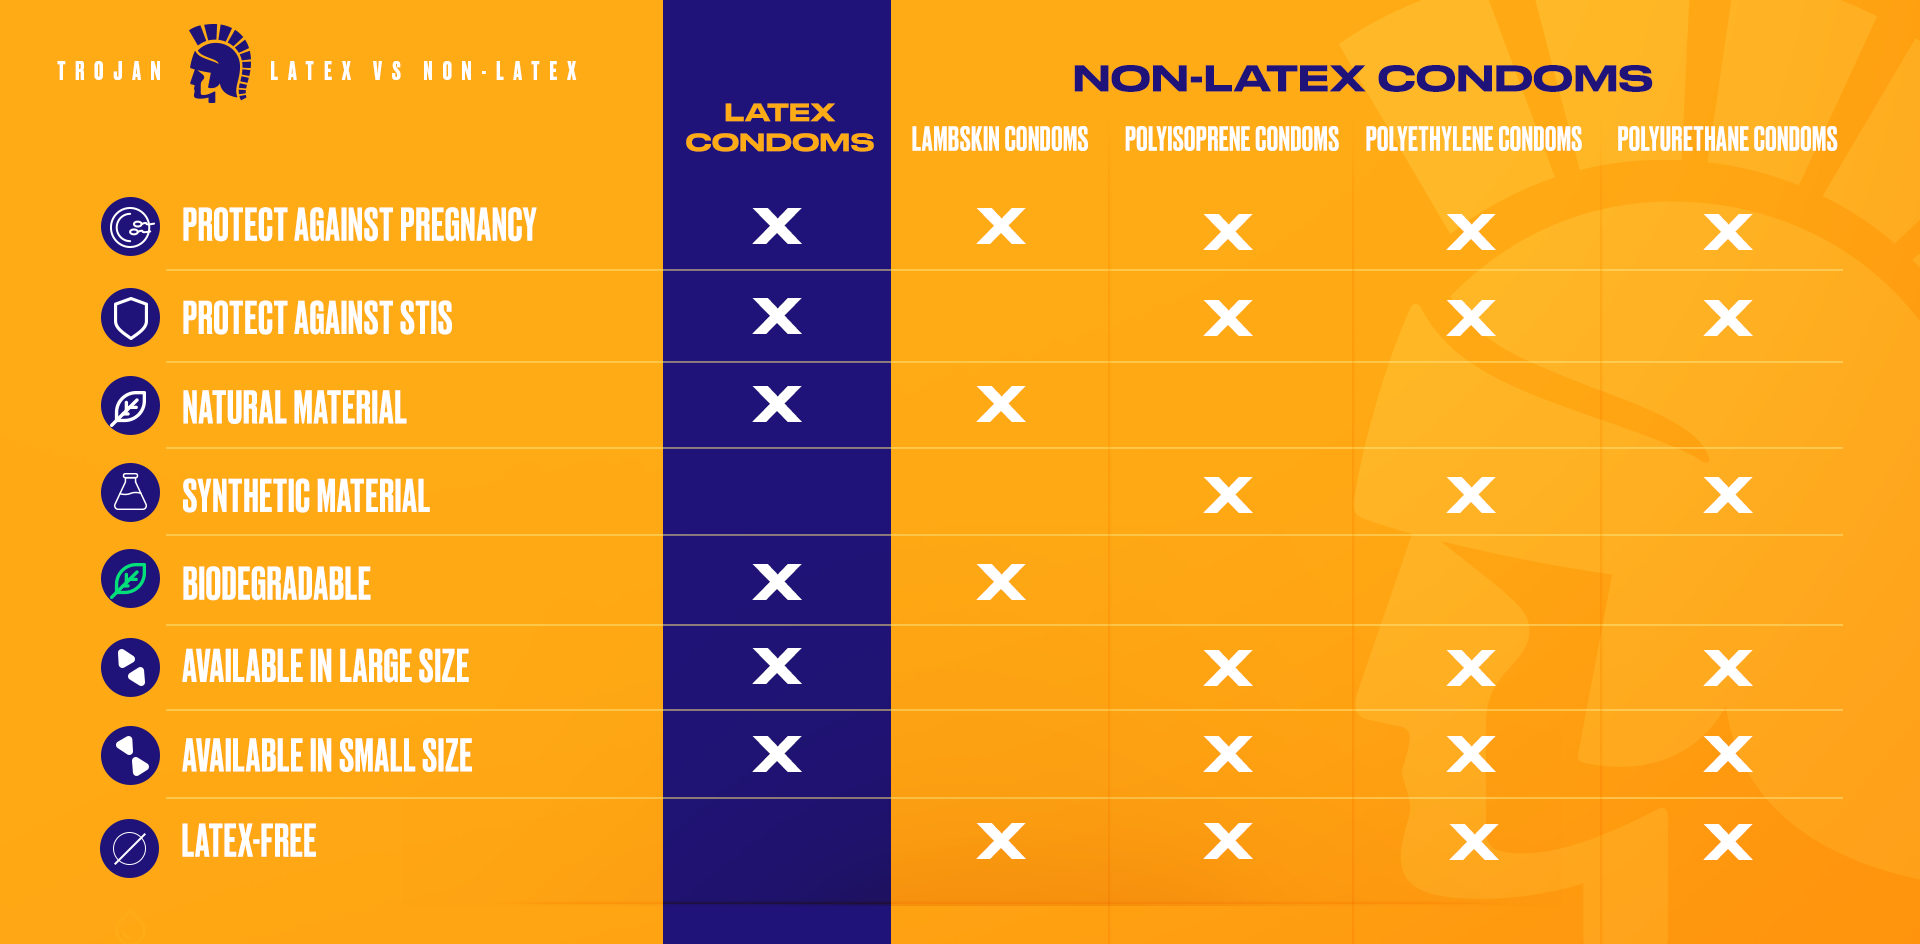  A chart comparing latex condoms with different types of non-latex condoms.